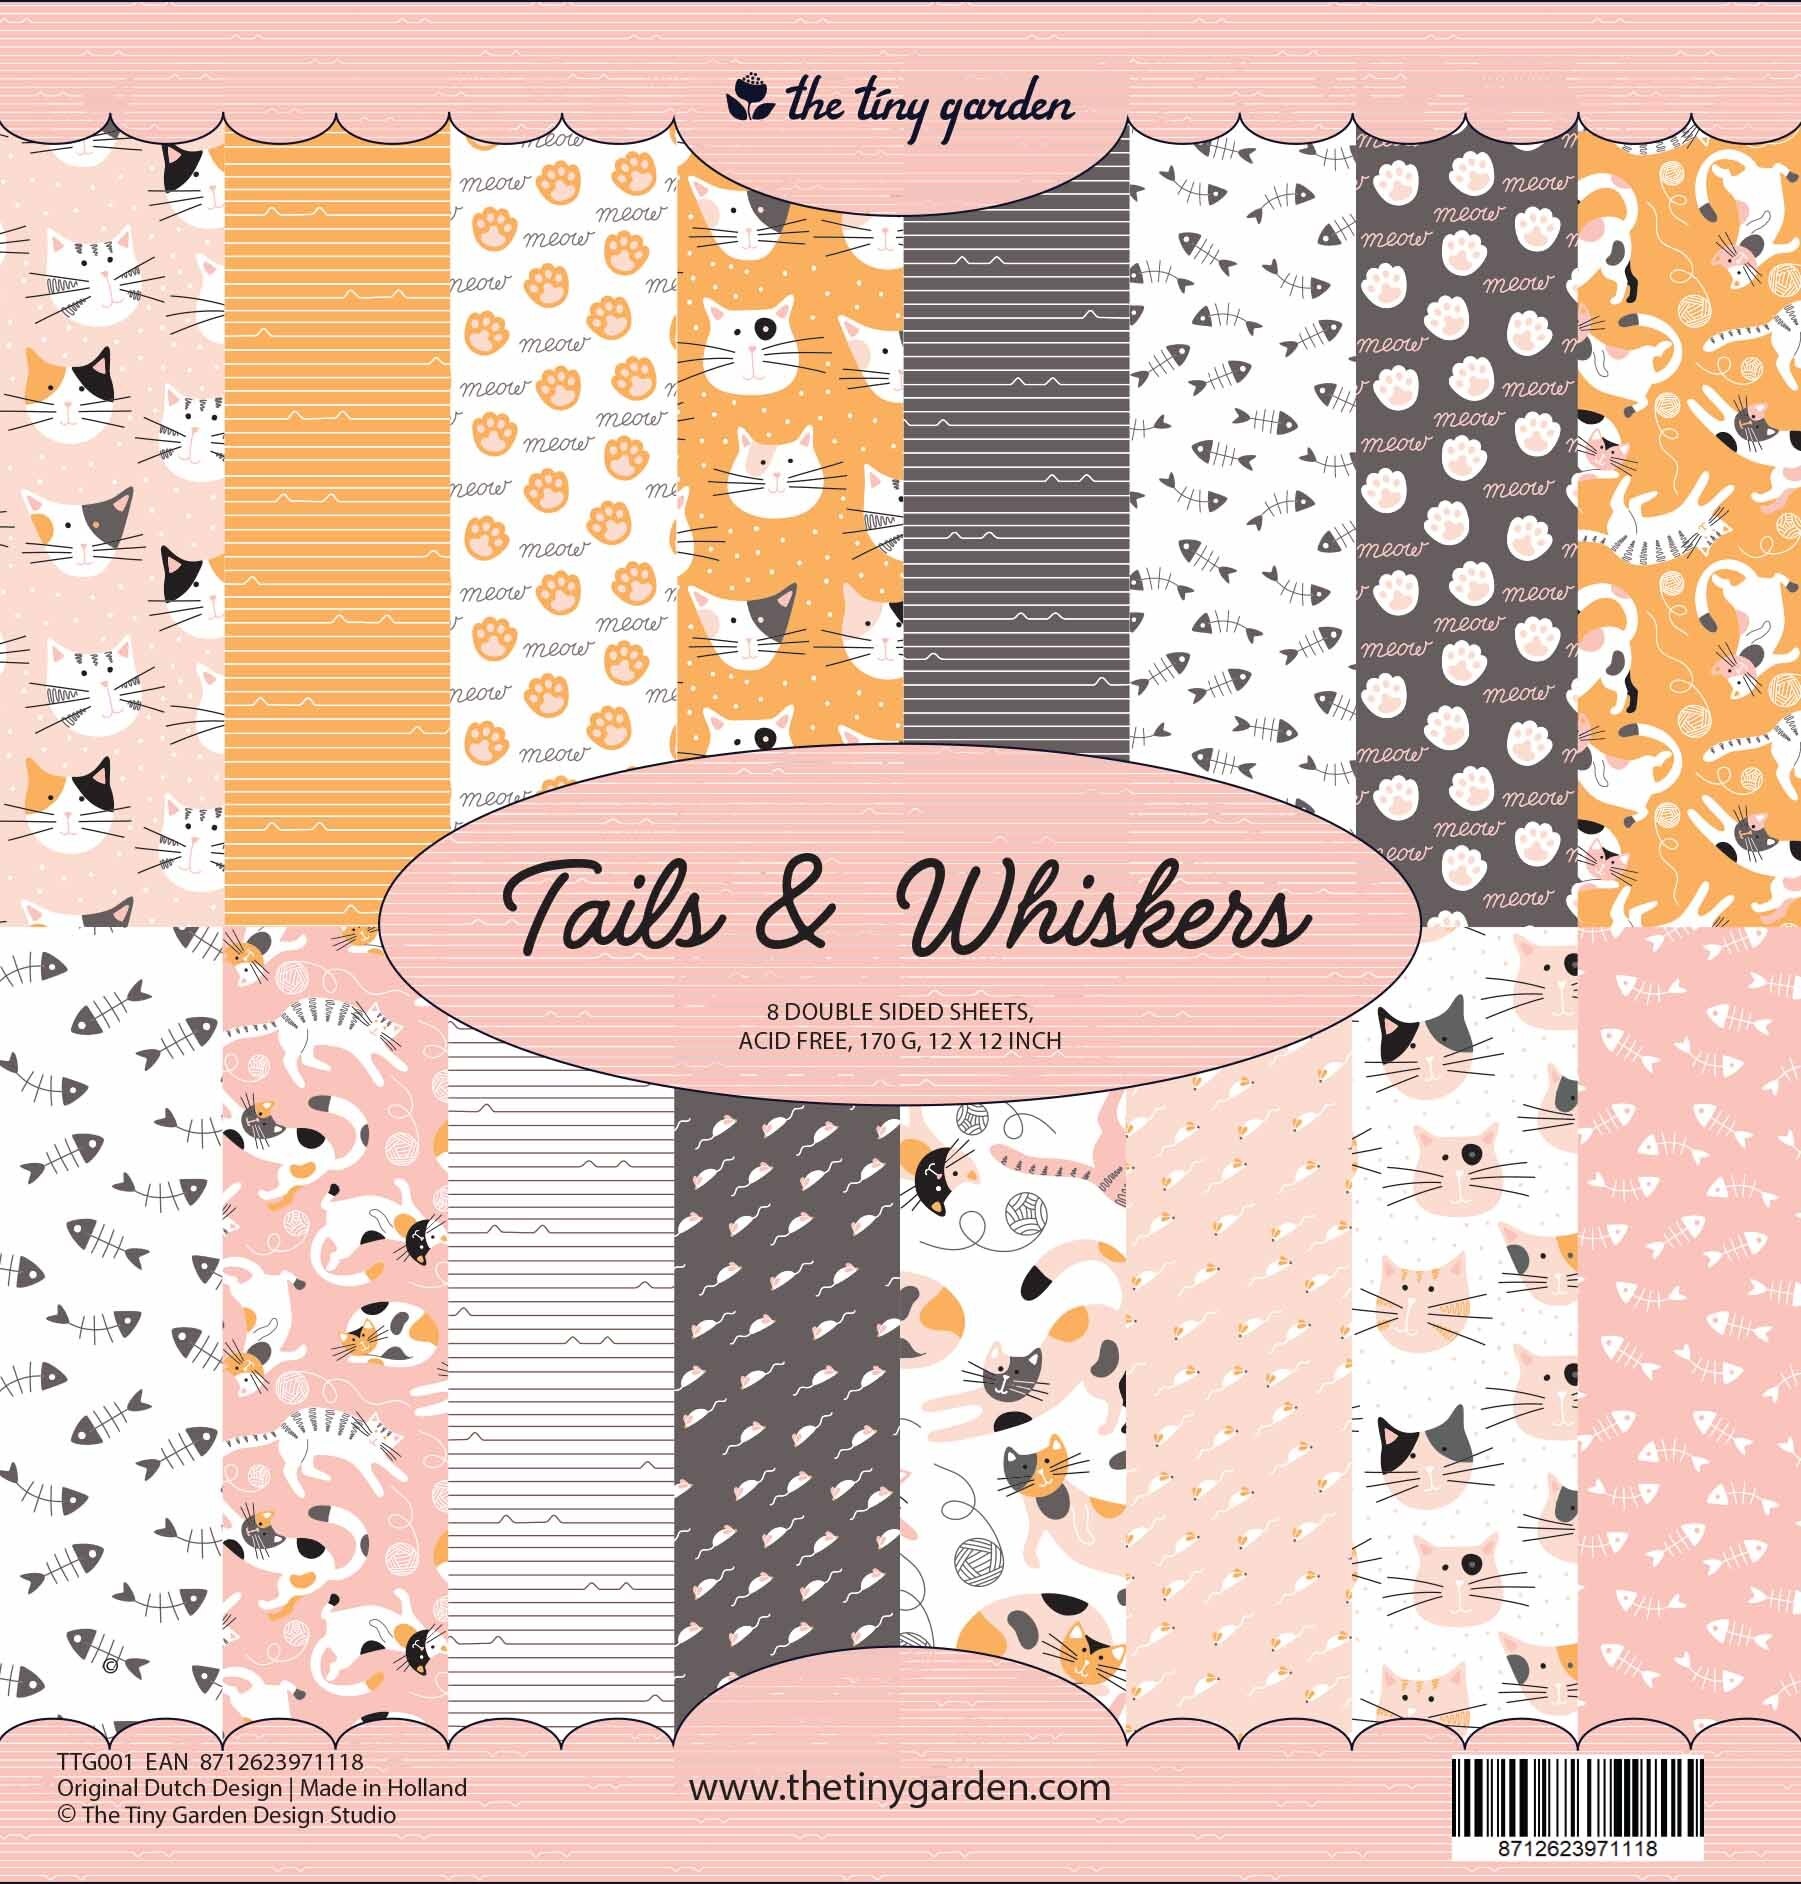 papier/scrap paper pad/the-tiny-garden-tails-whiskers-12x12-inch-paper-pa.jpg